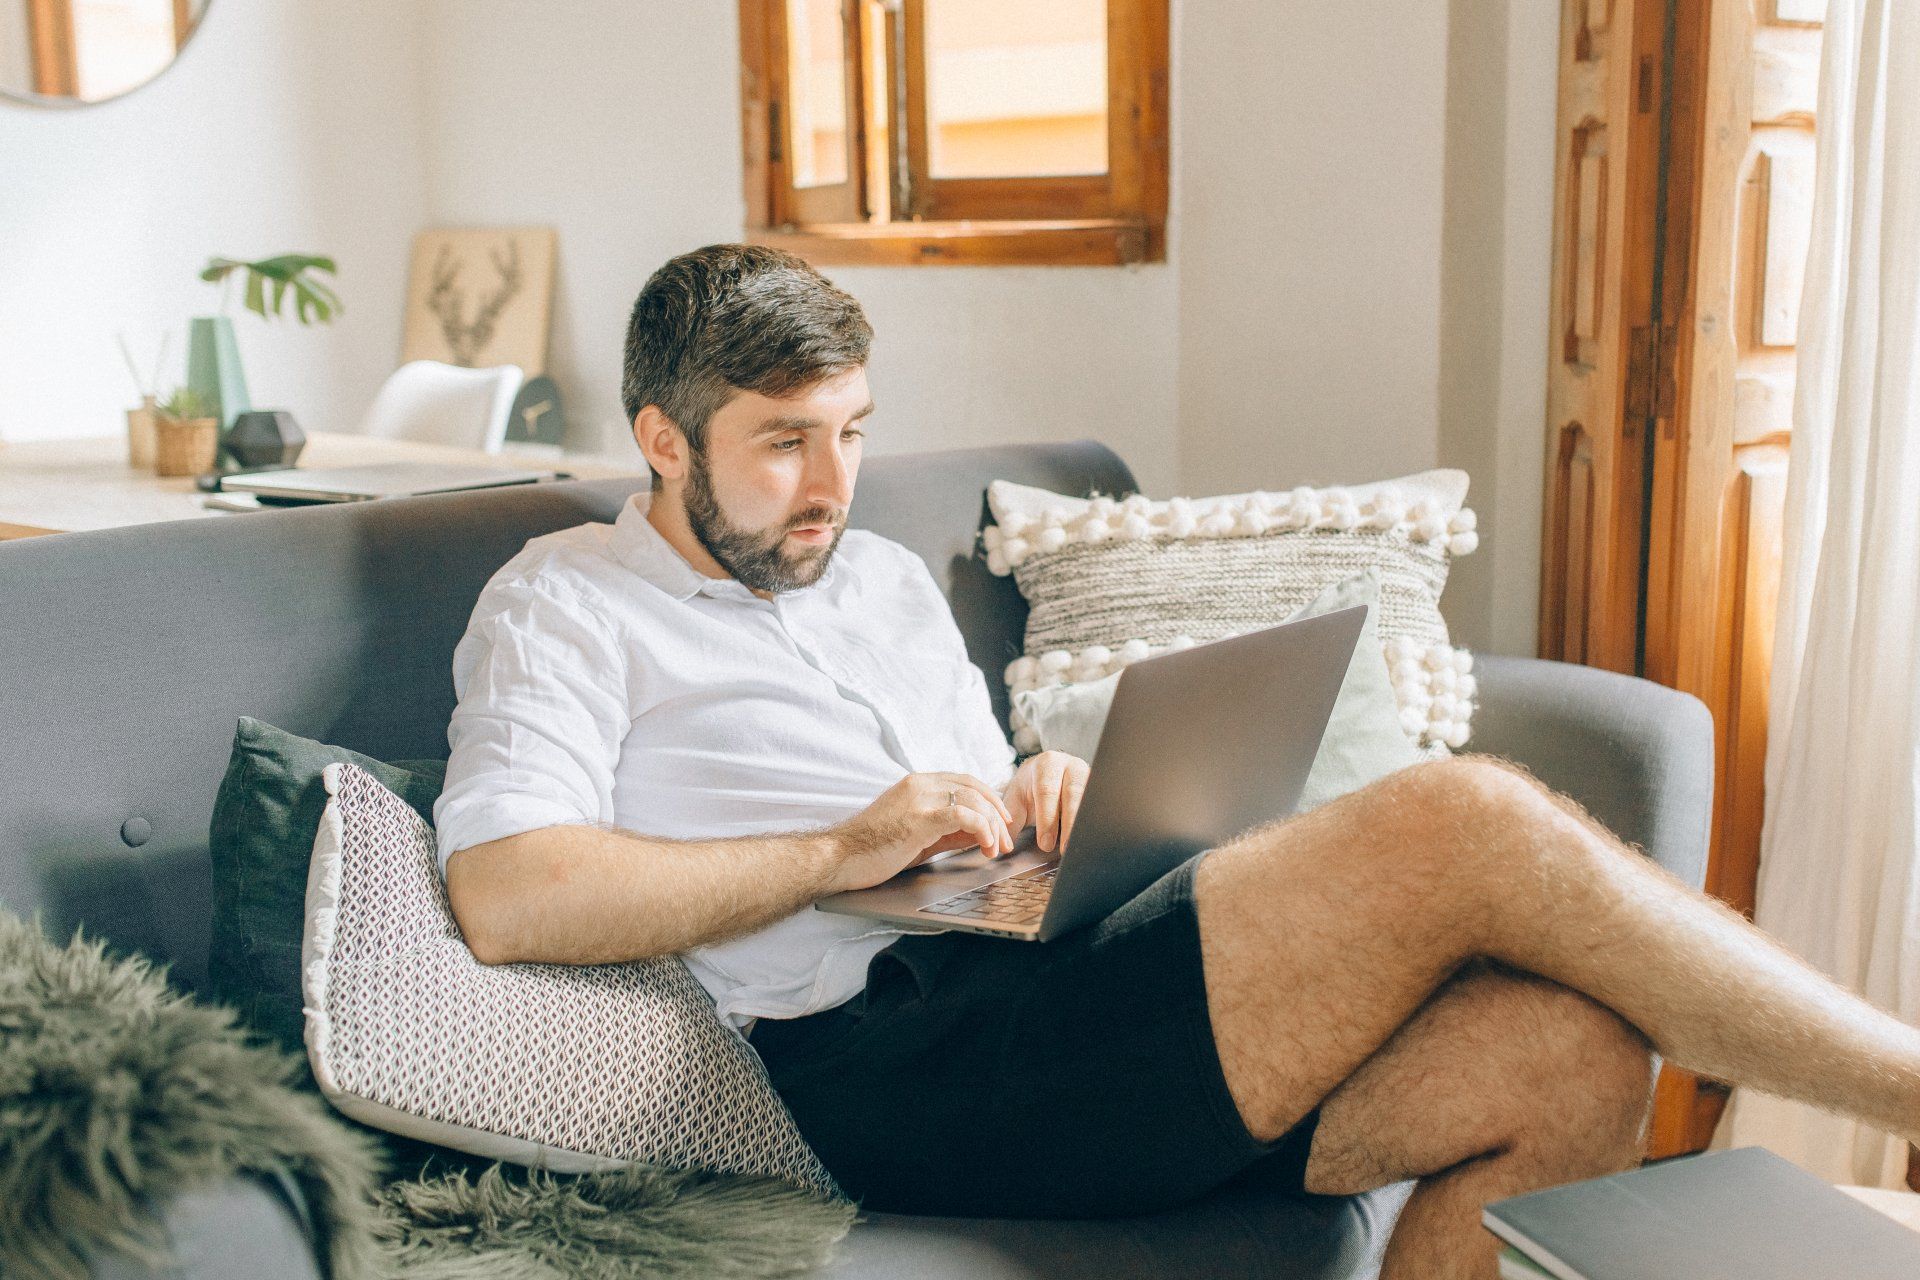 Image of a man using a laptop at home